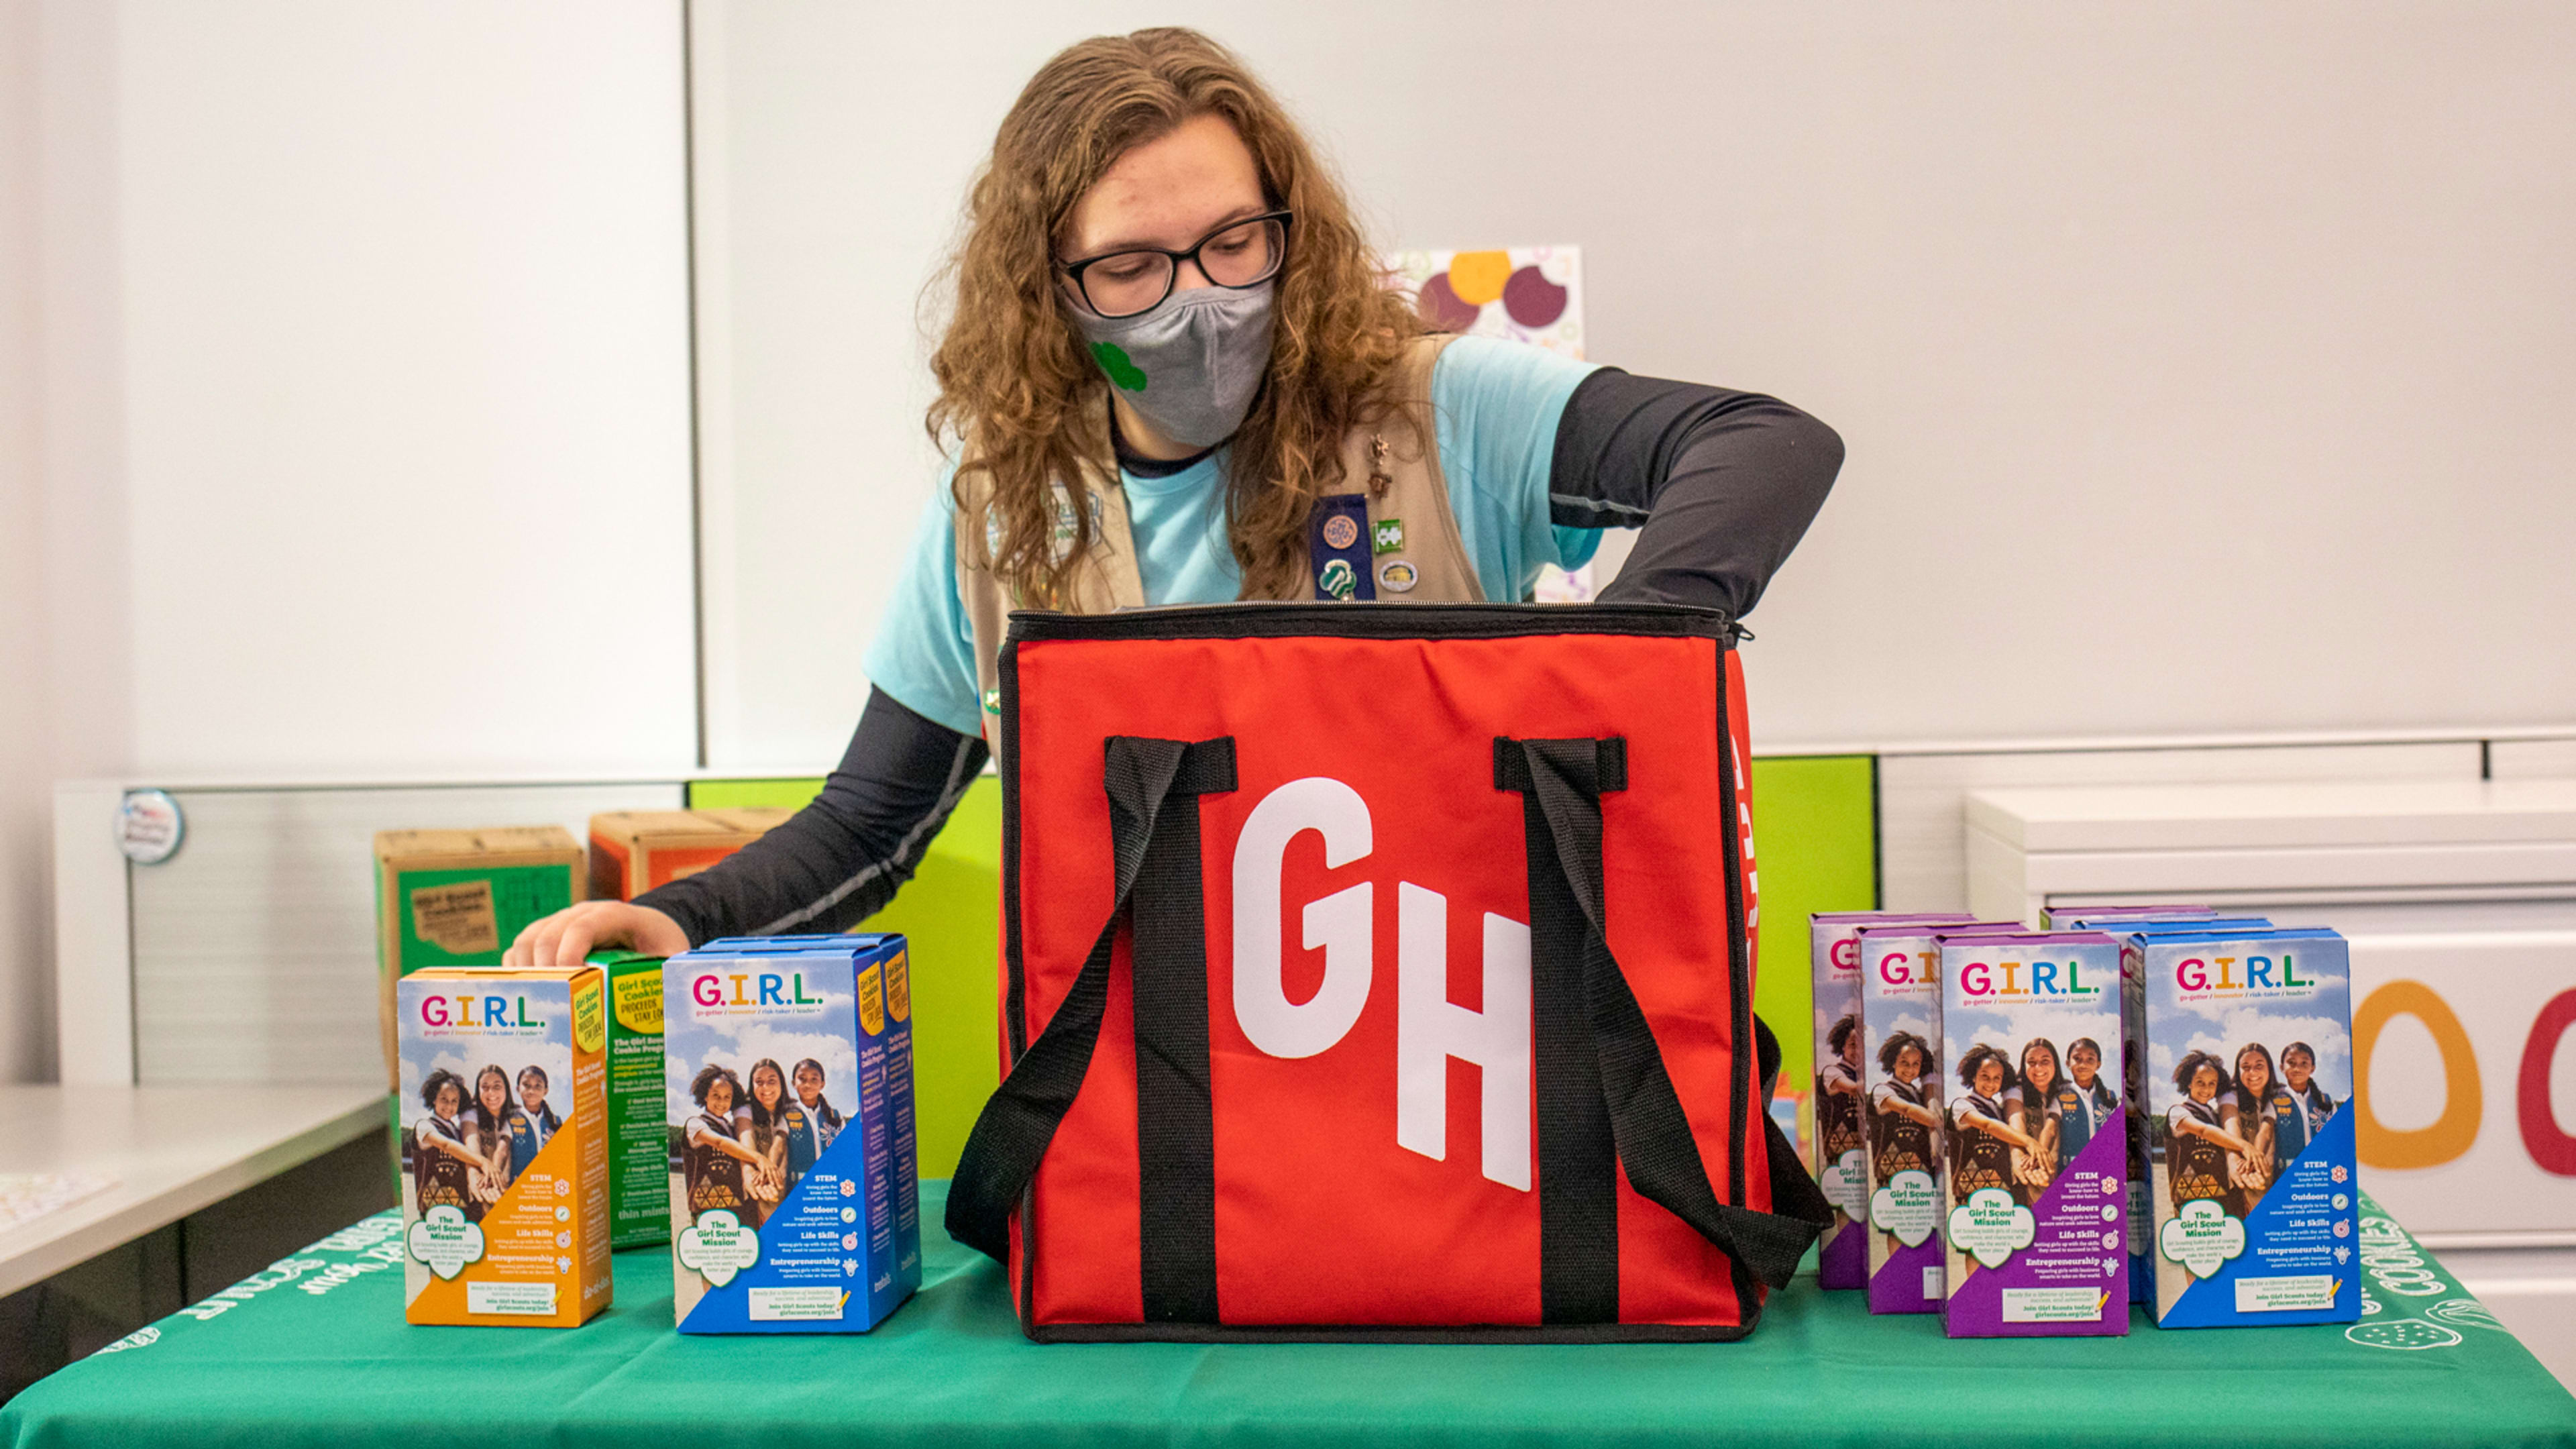 Now you can order Girl Scout cookies with Grubhub. Here’s how